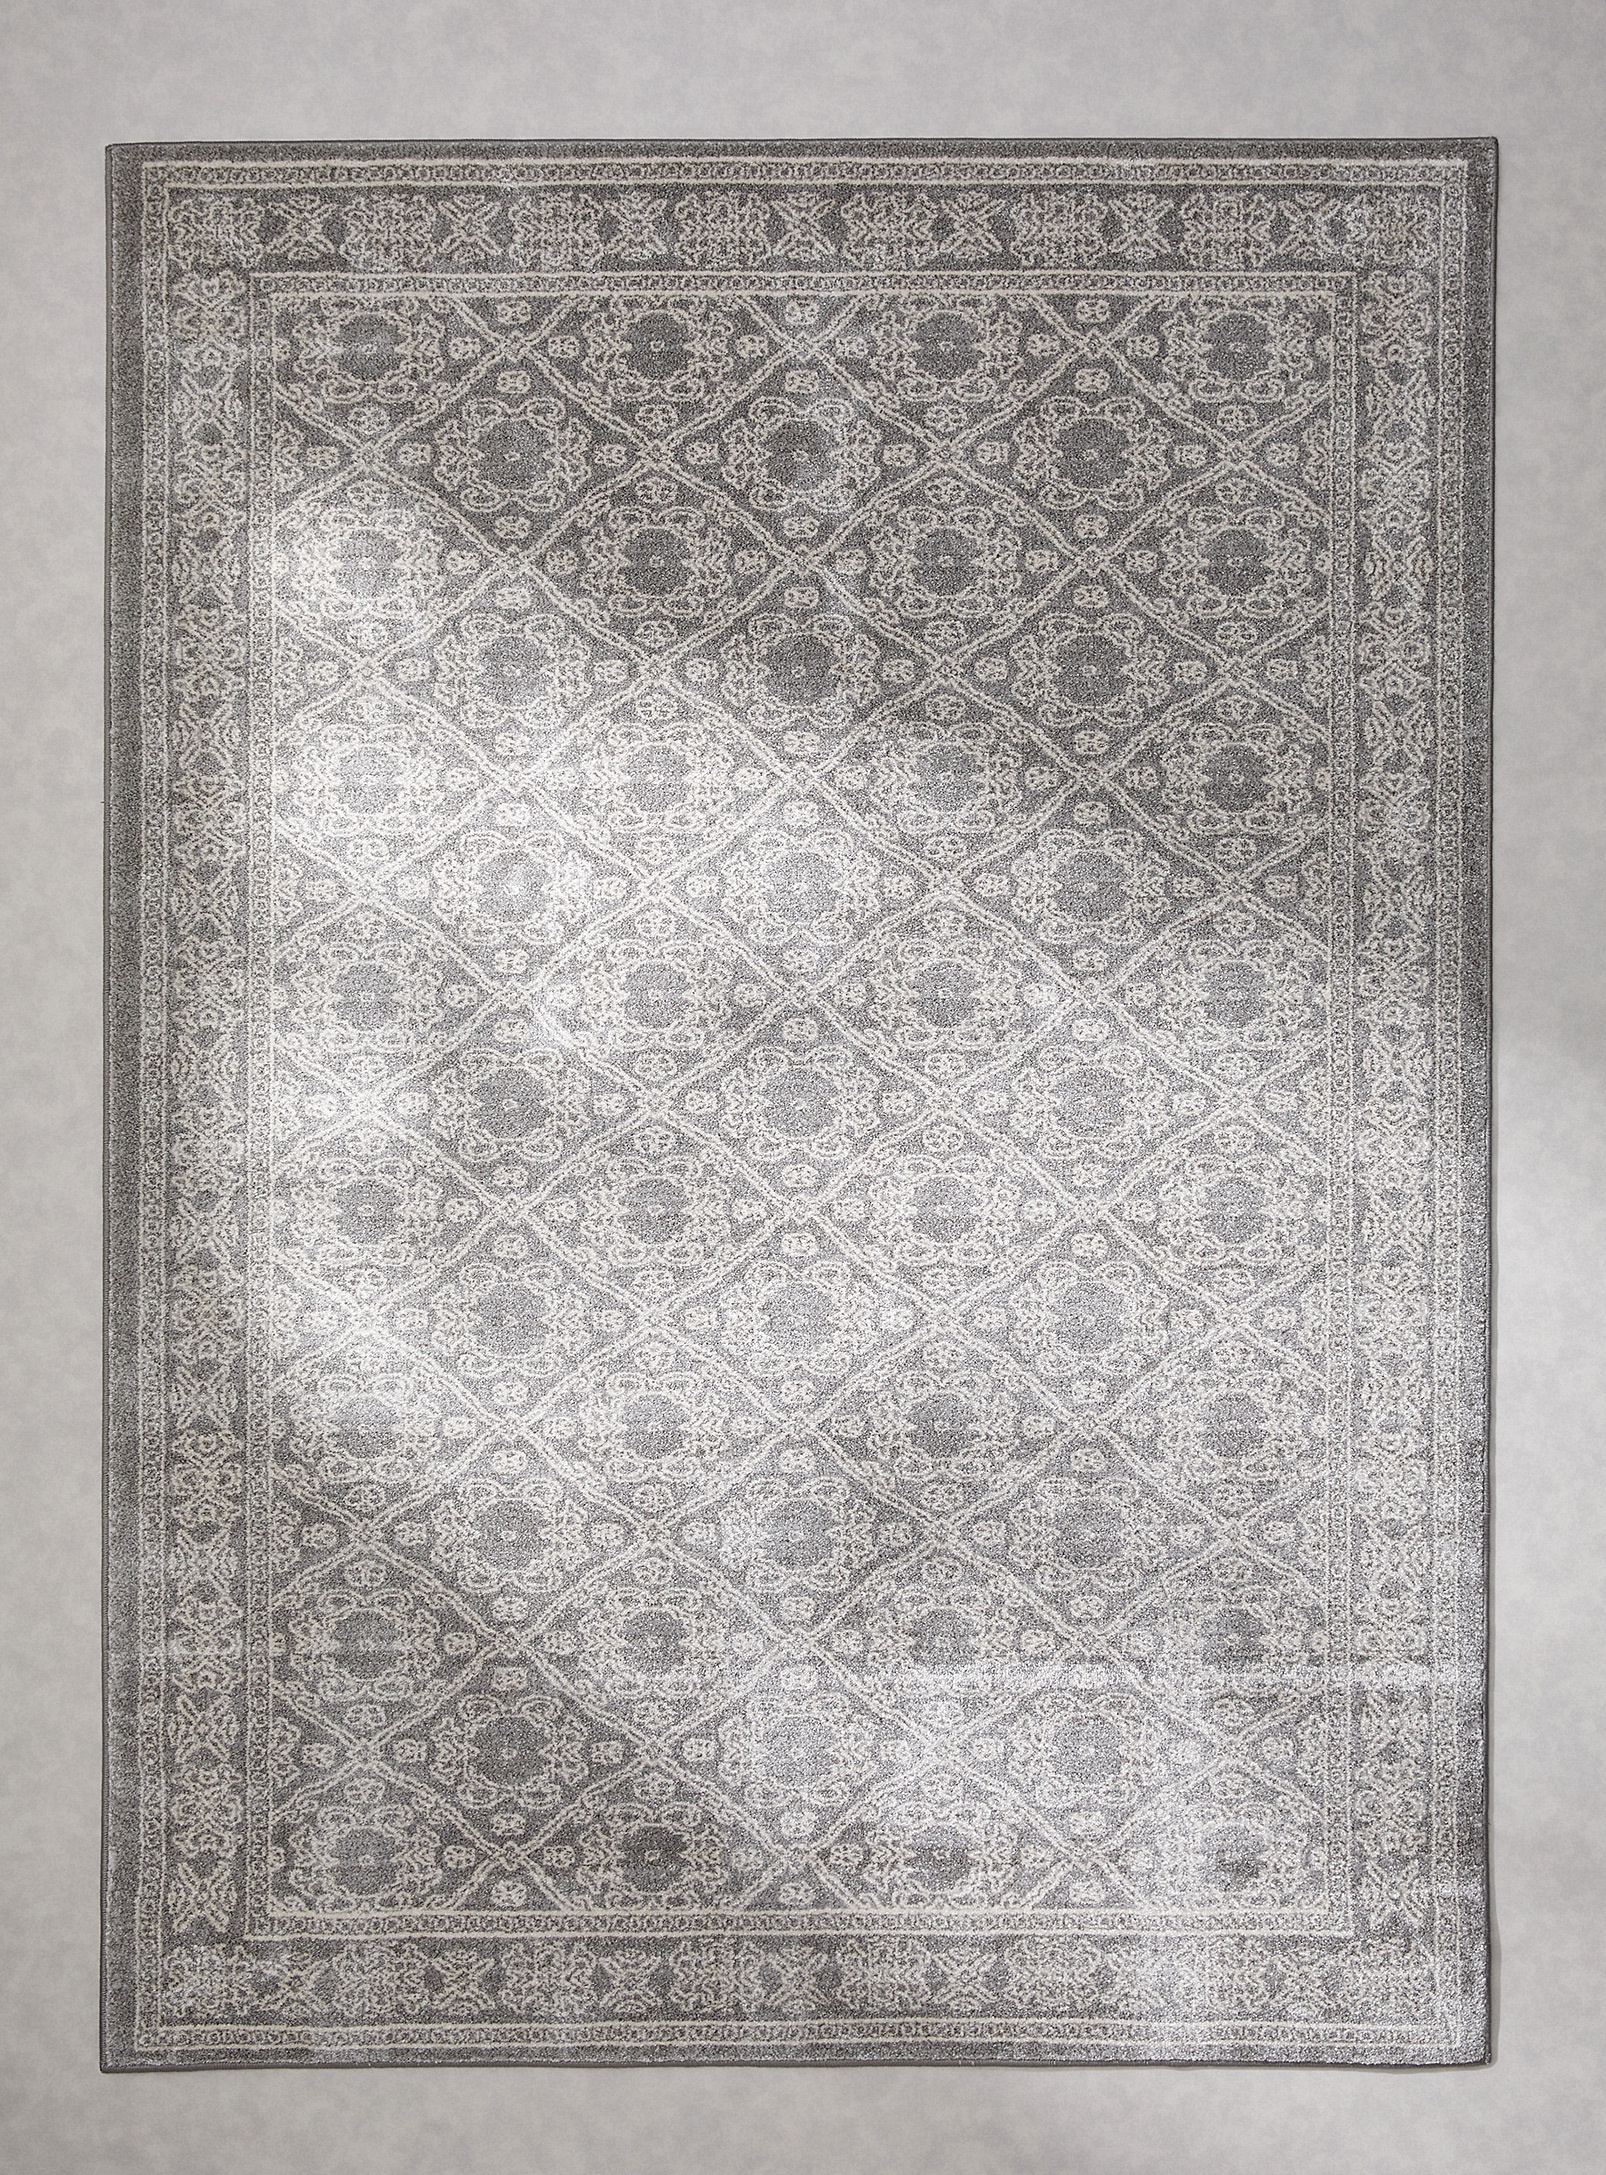 Simons Maison Romantic Mosaic Rug See Available Sizes In Patterned Grey